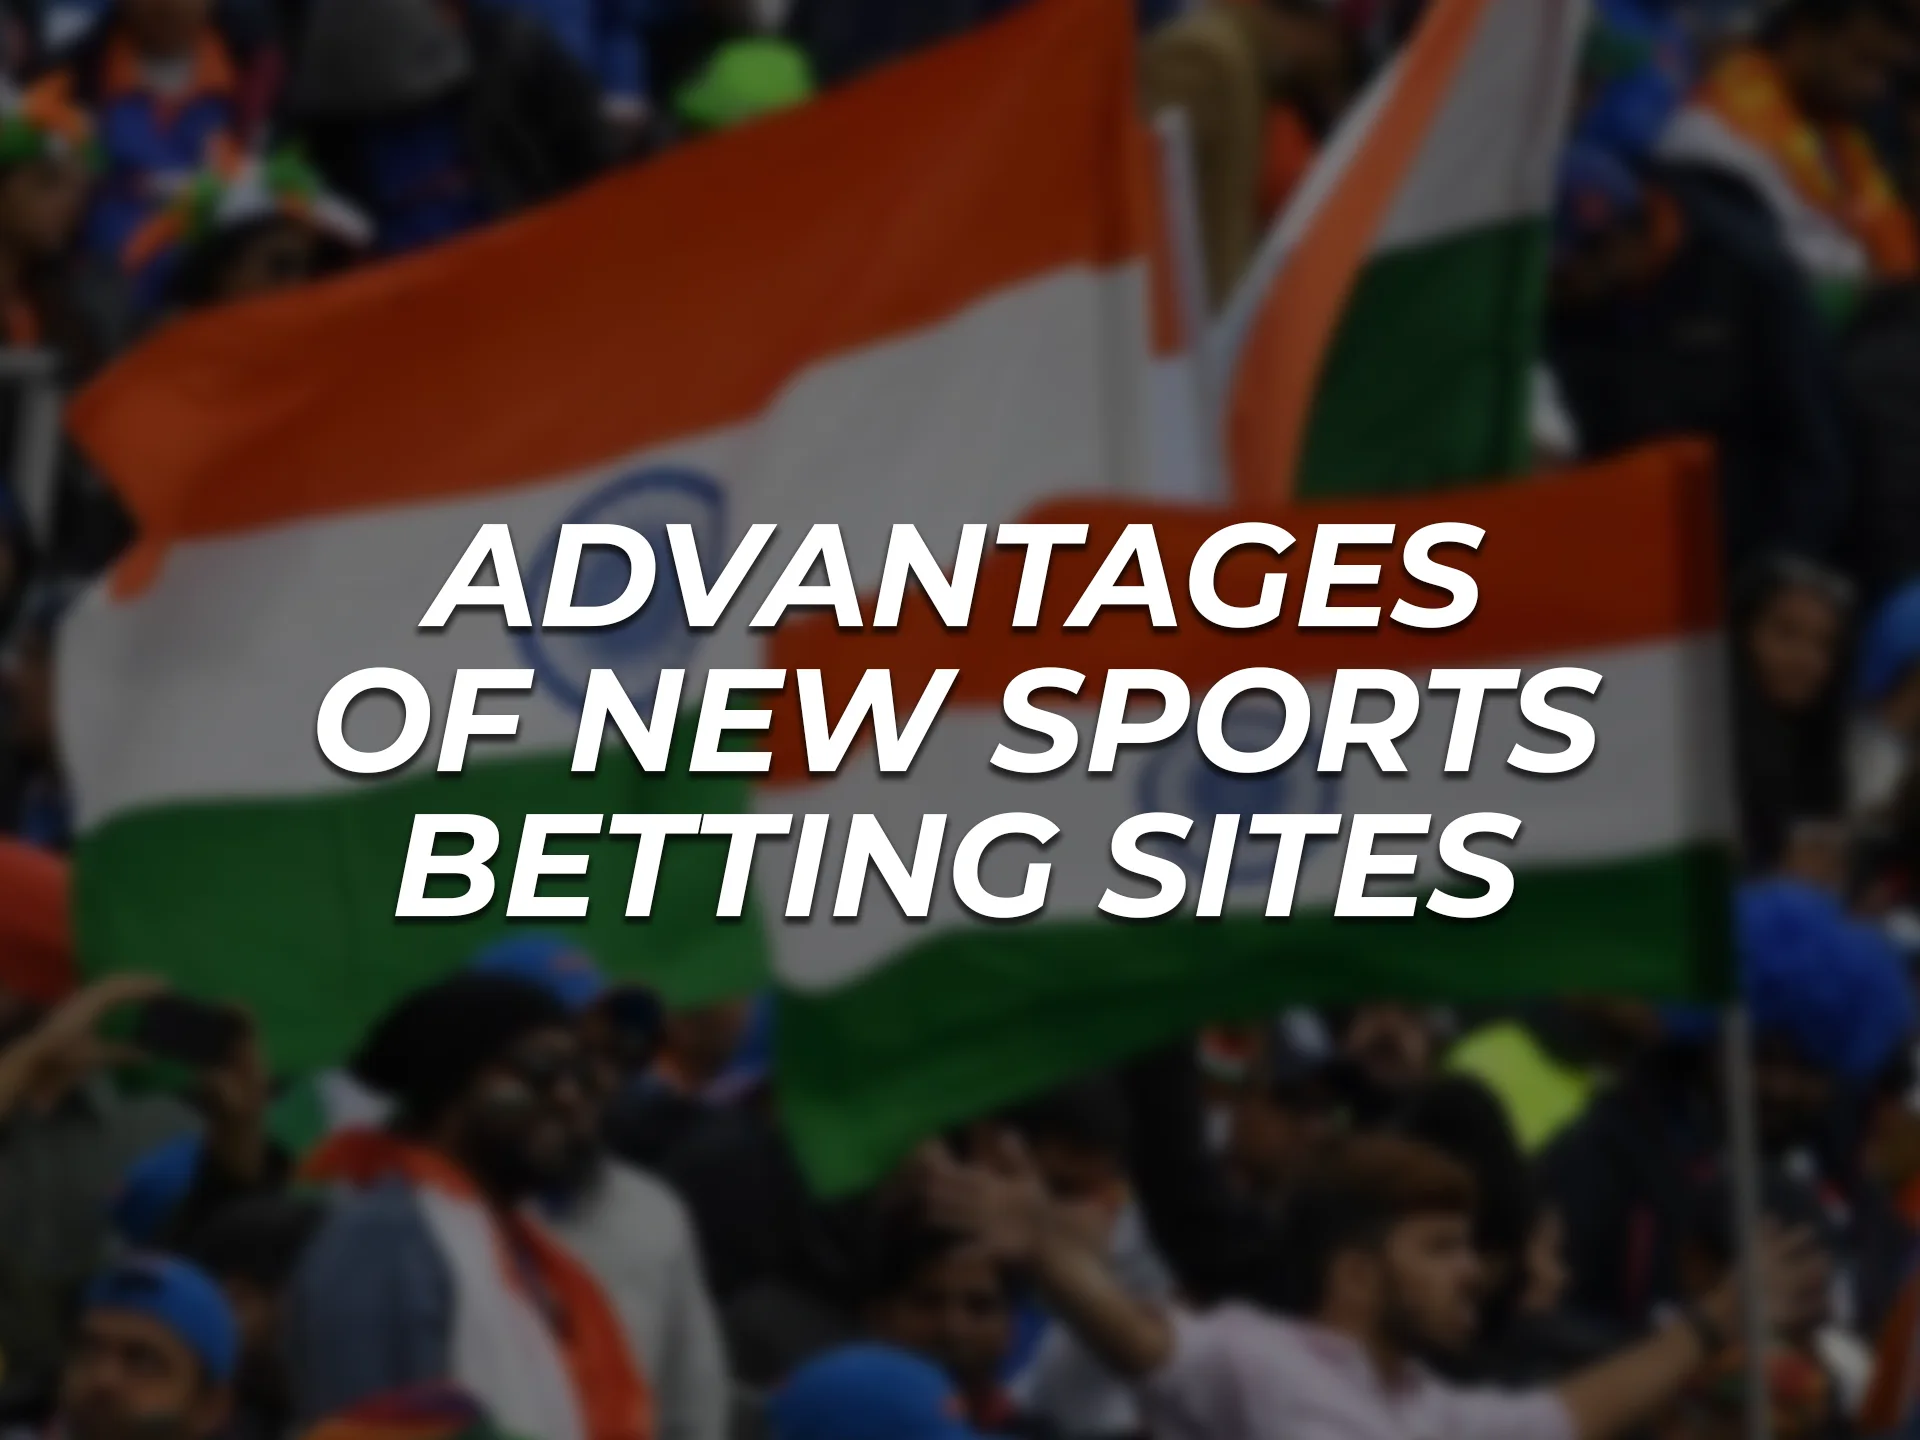 Explore the advantages of new sports betting sites to increase your chance of winning.